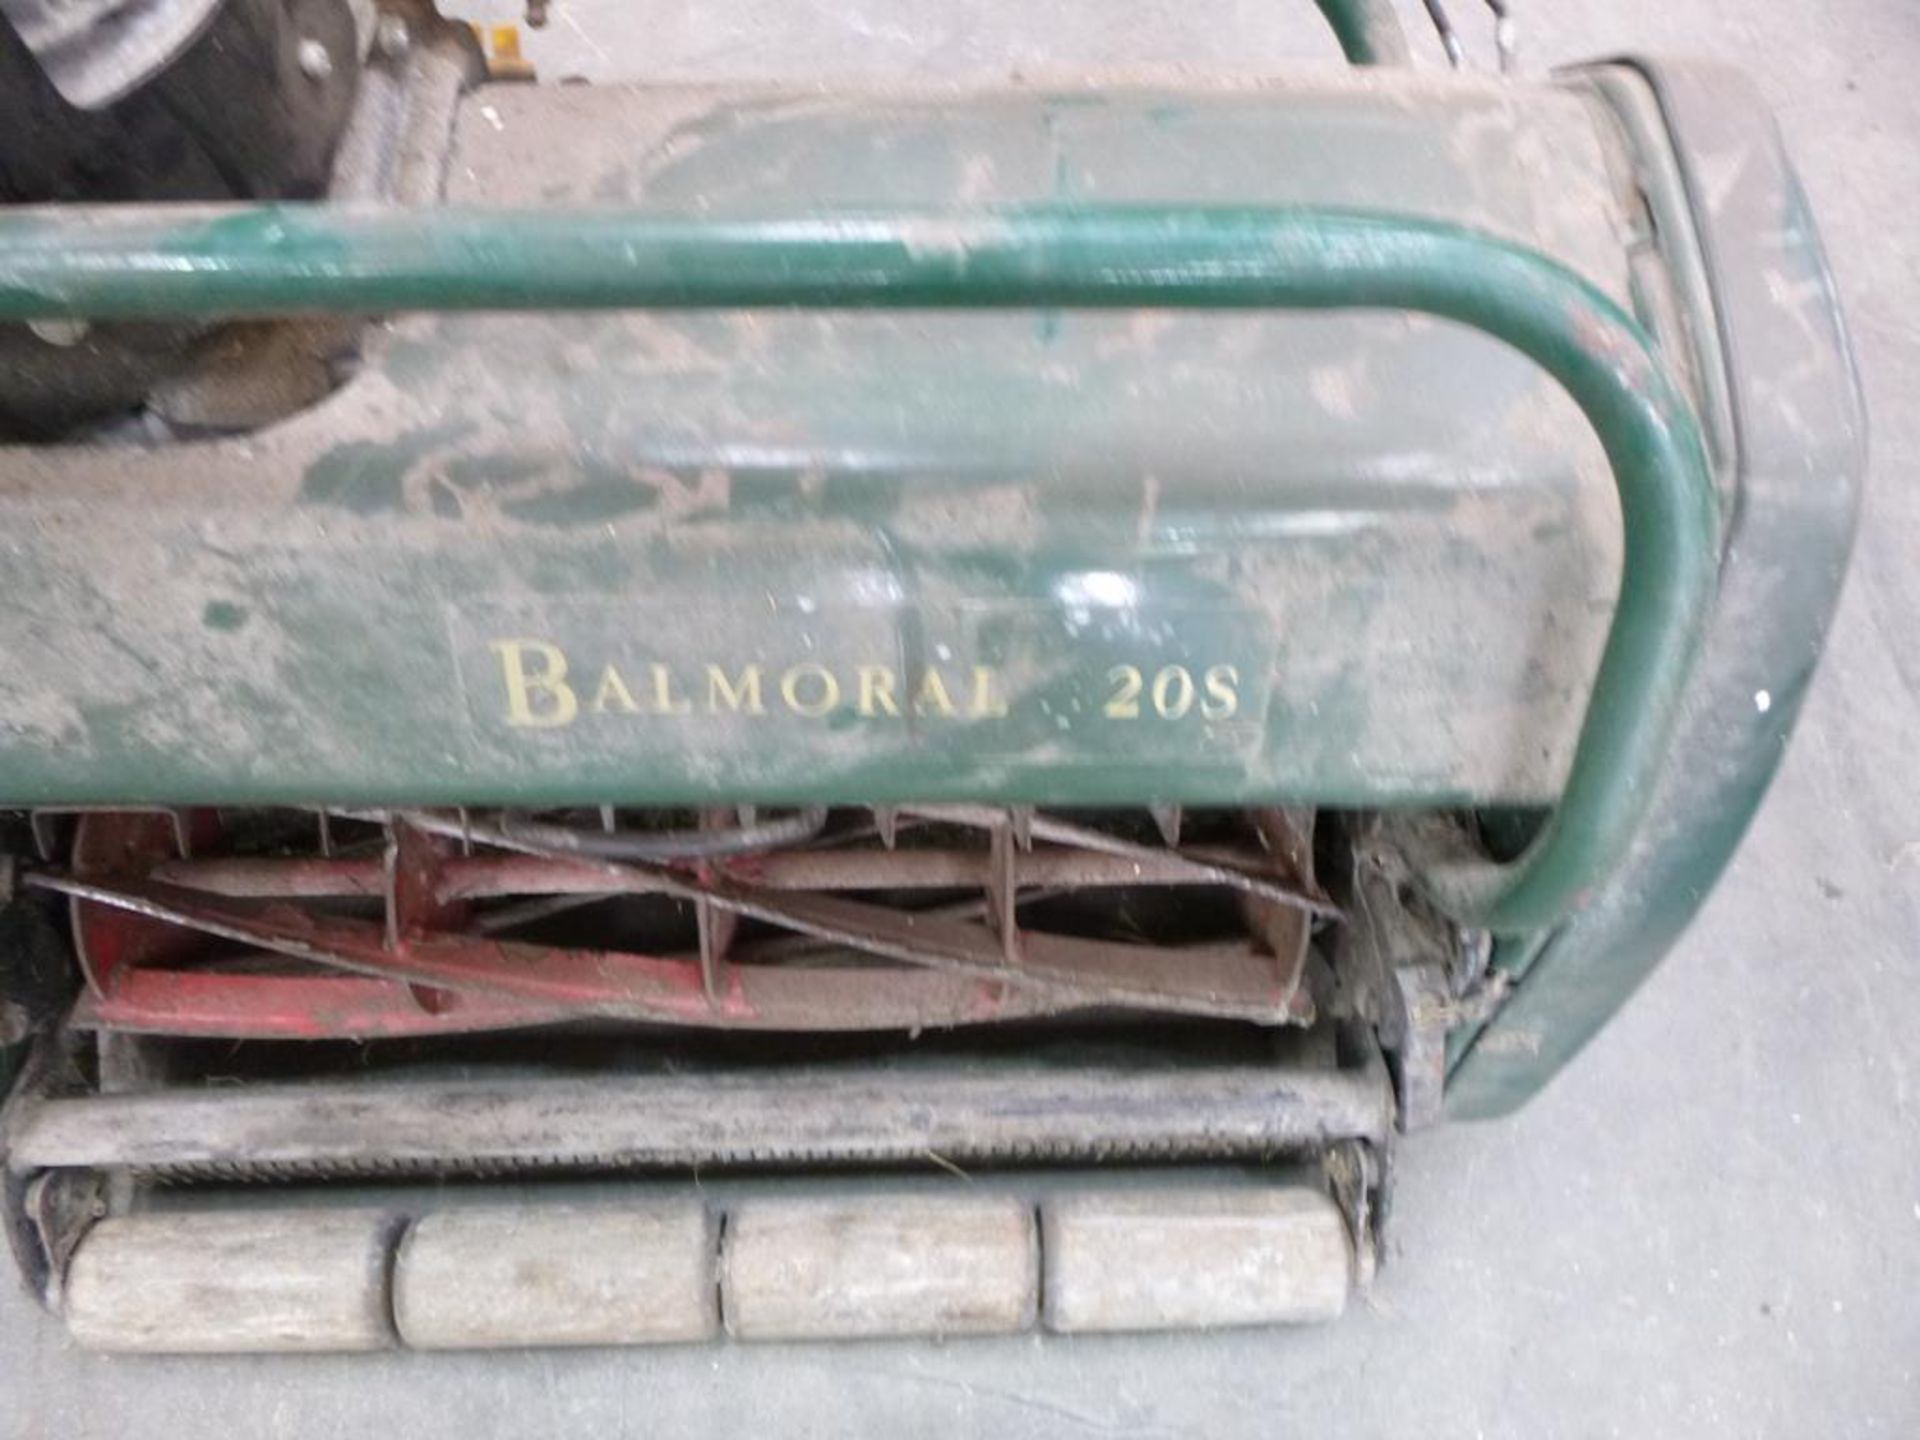 A Trade In Atco Balmoral 20S Lawnmower - Image 2 of 3